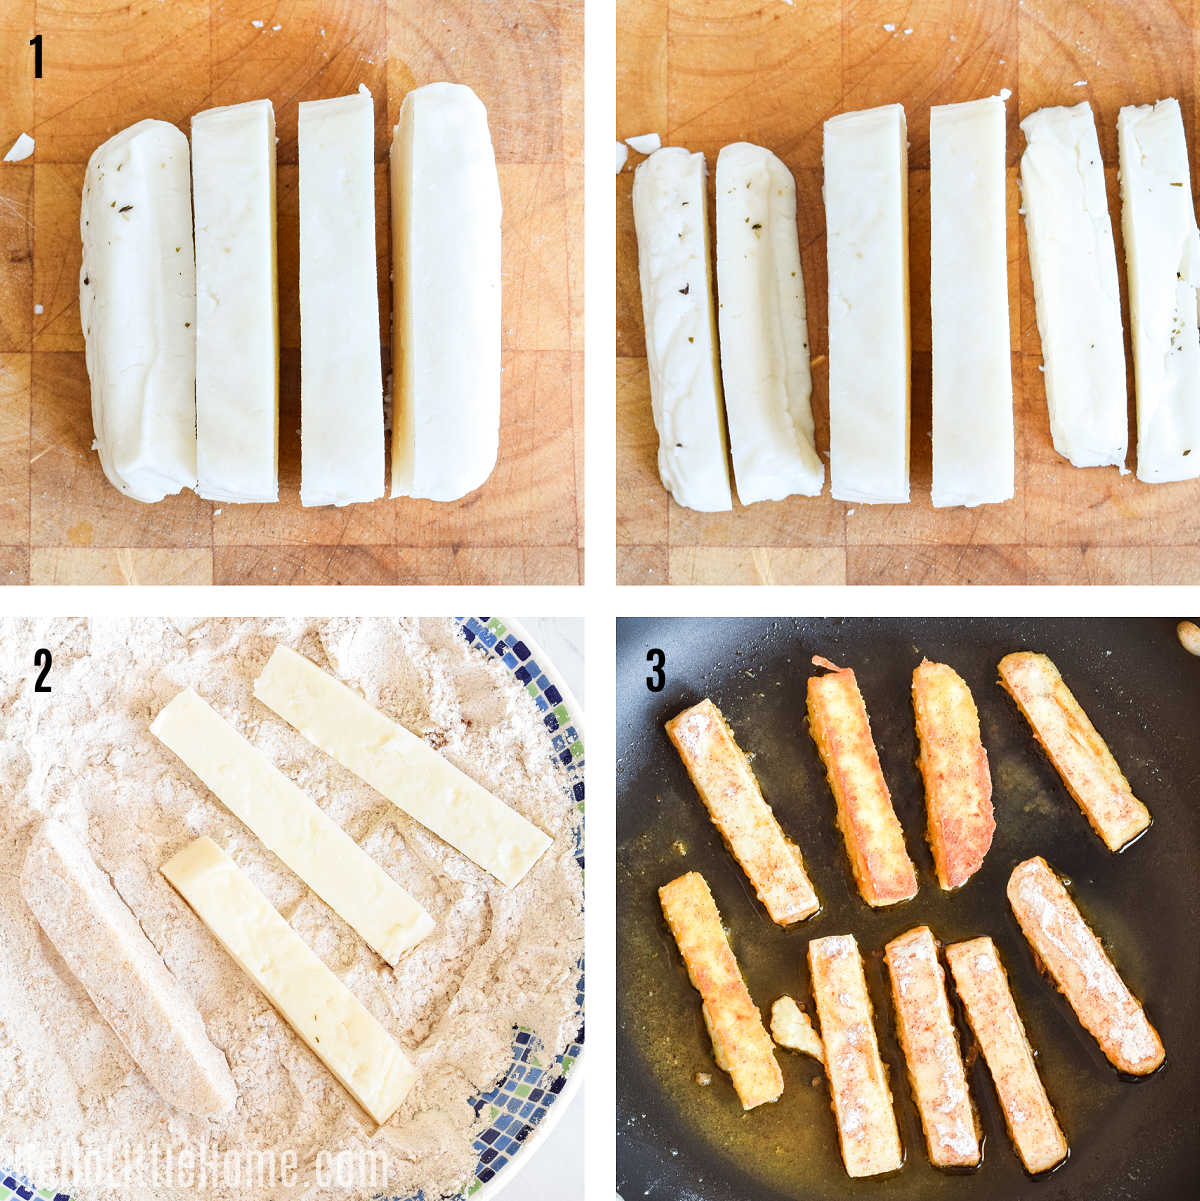 A photo collage showing how to make halloumi fries step-by-step.